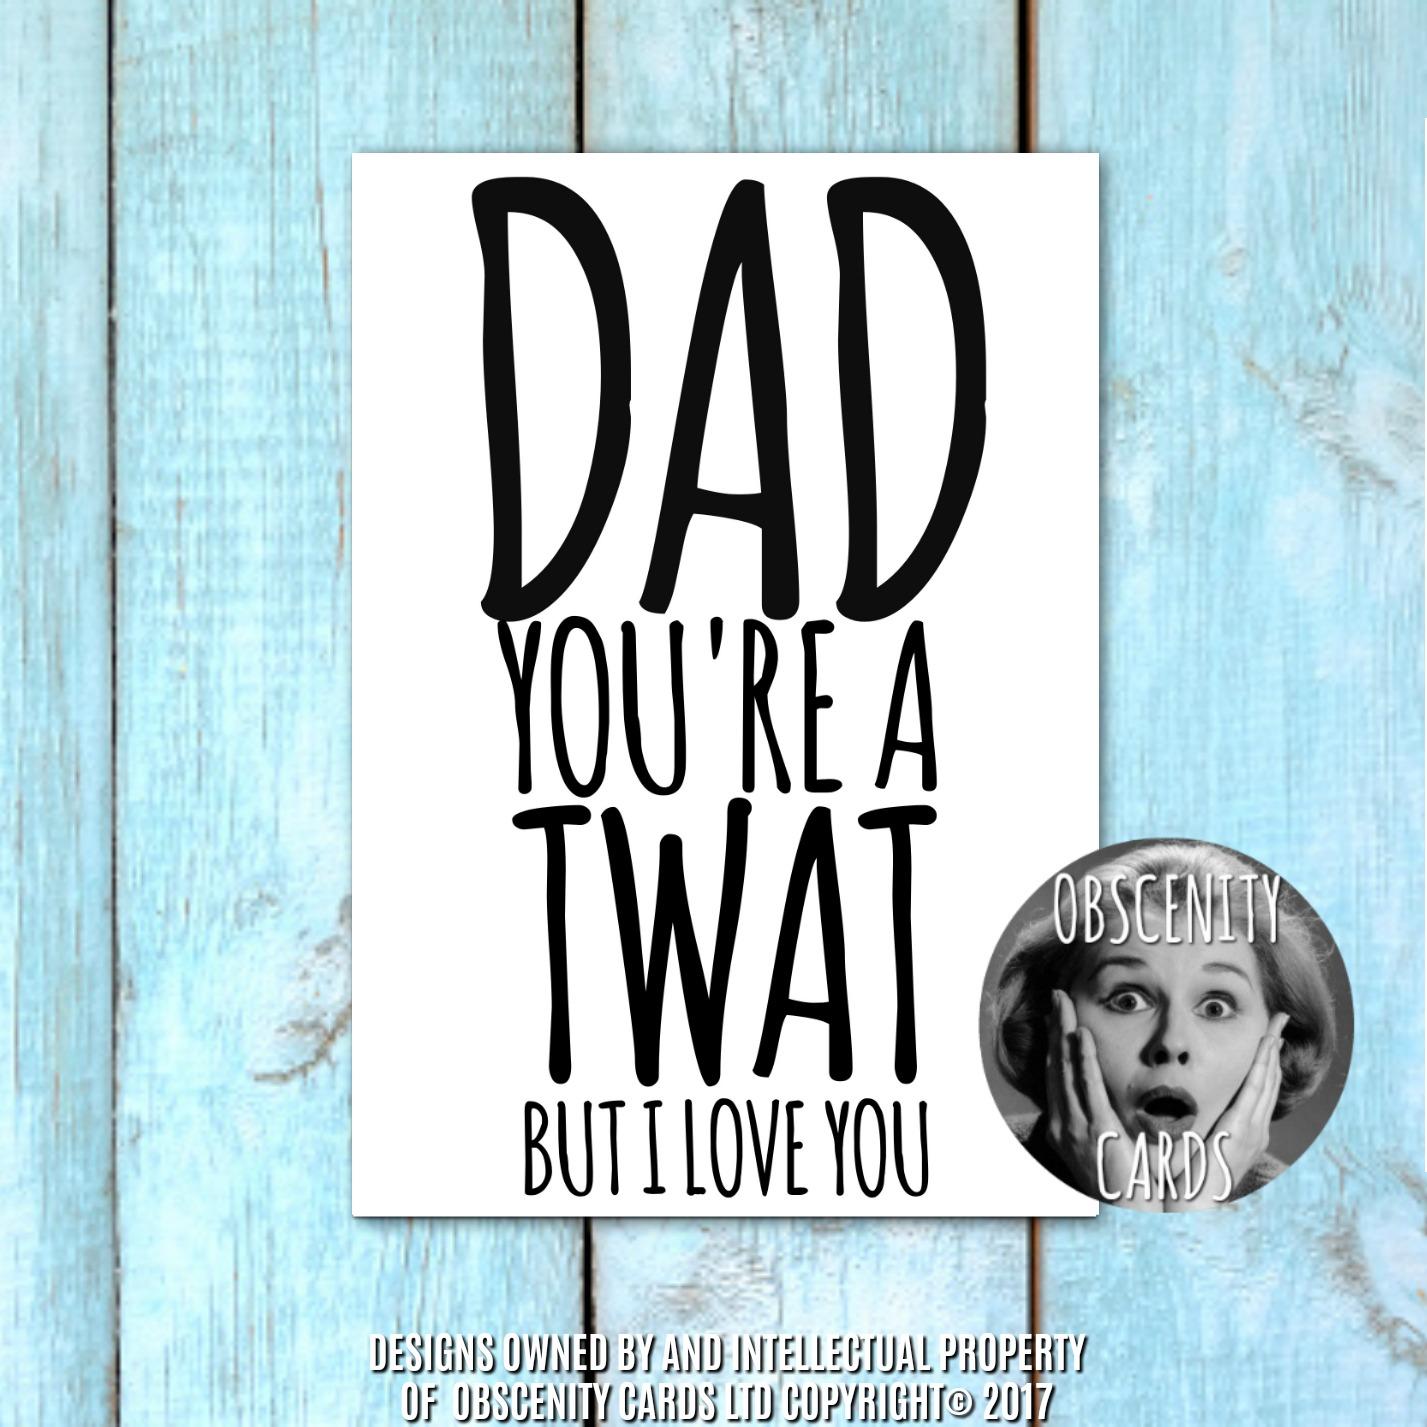 Obscene funny offensive fathers day cards by Obscenity cards. Obscene Funny Cards, Pens, Party Hats, Key rings, Magnets, Lighters & Loads More!